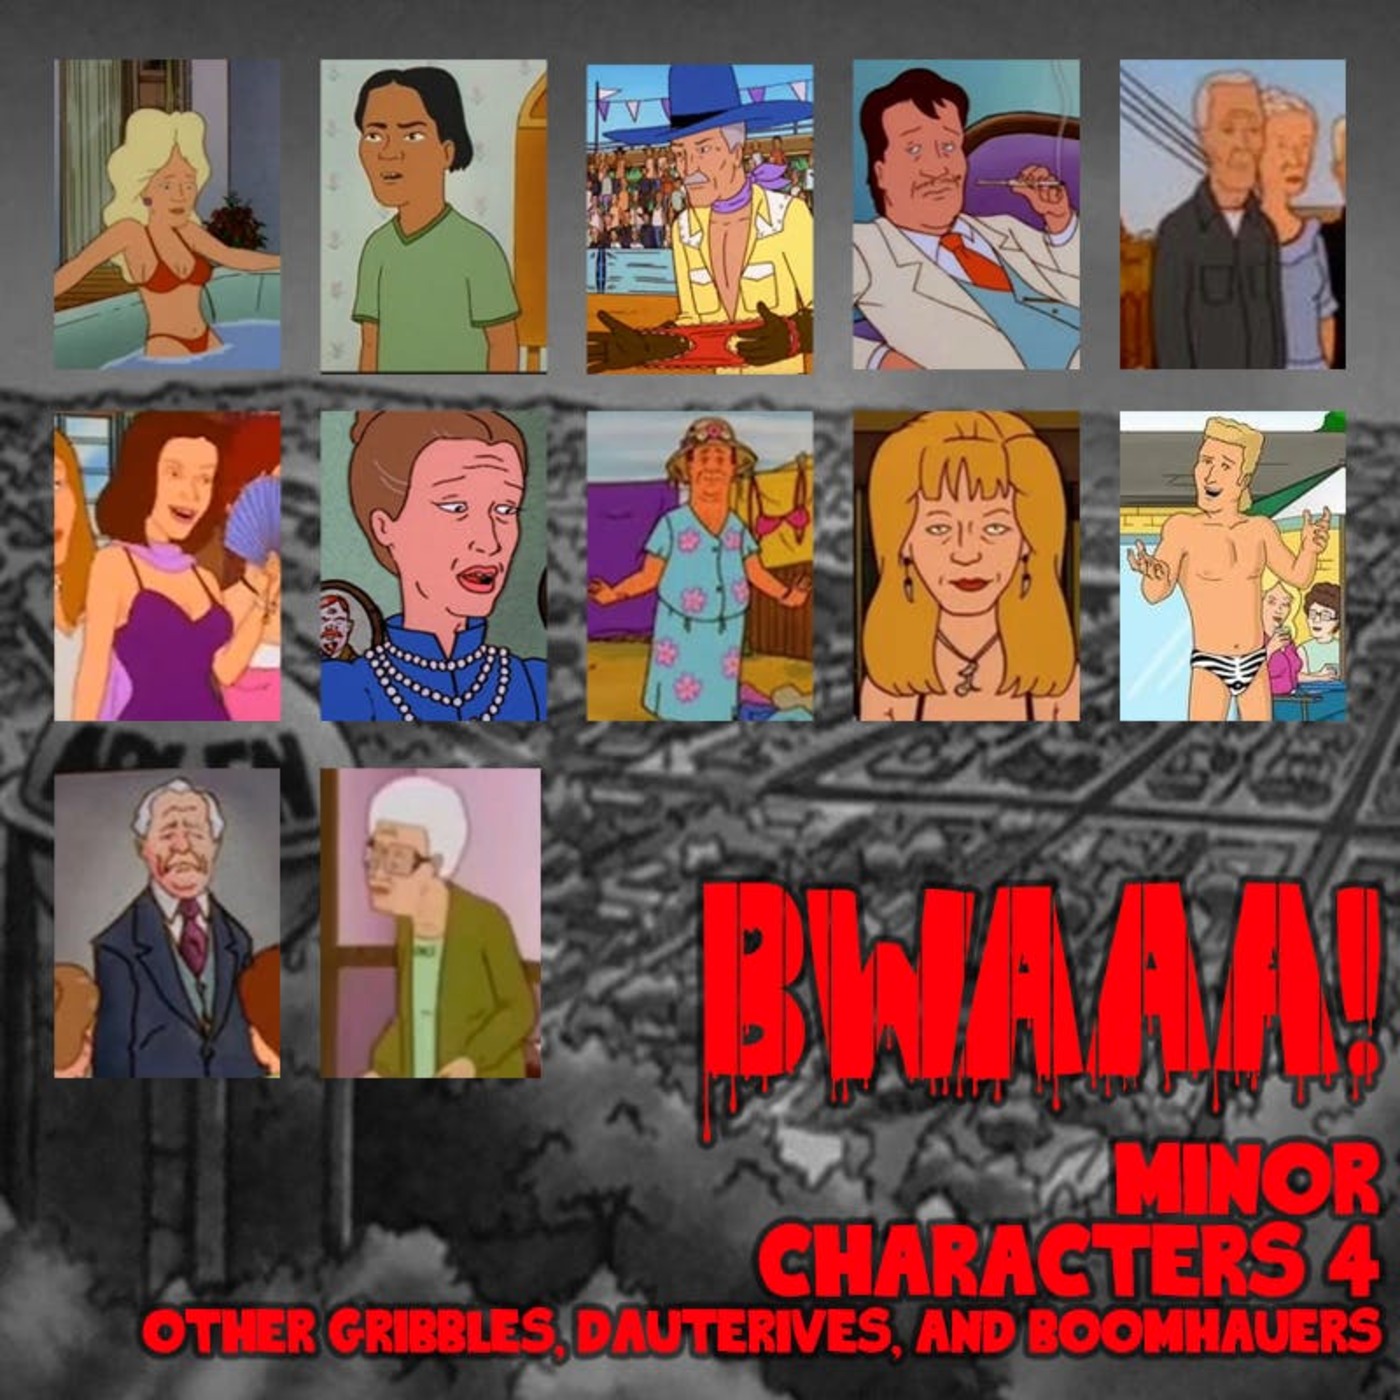 Category:Deceased Characters, King of the Hill Wiki